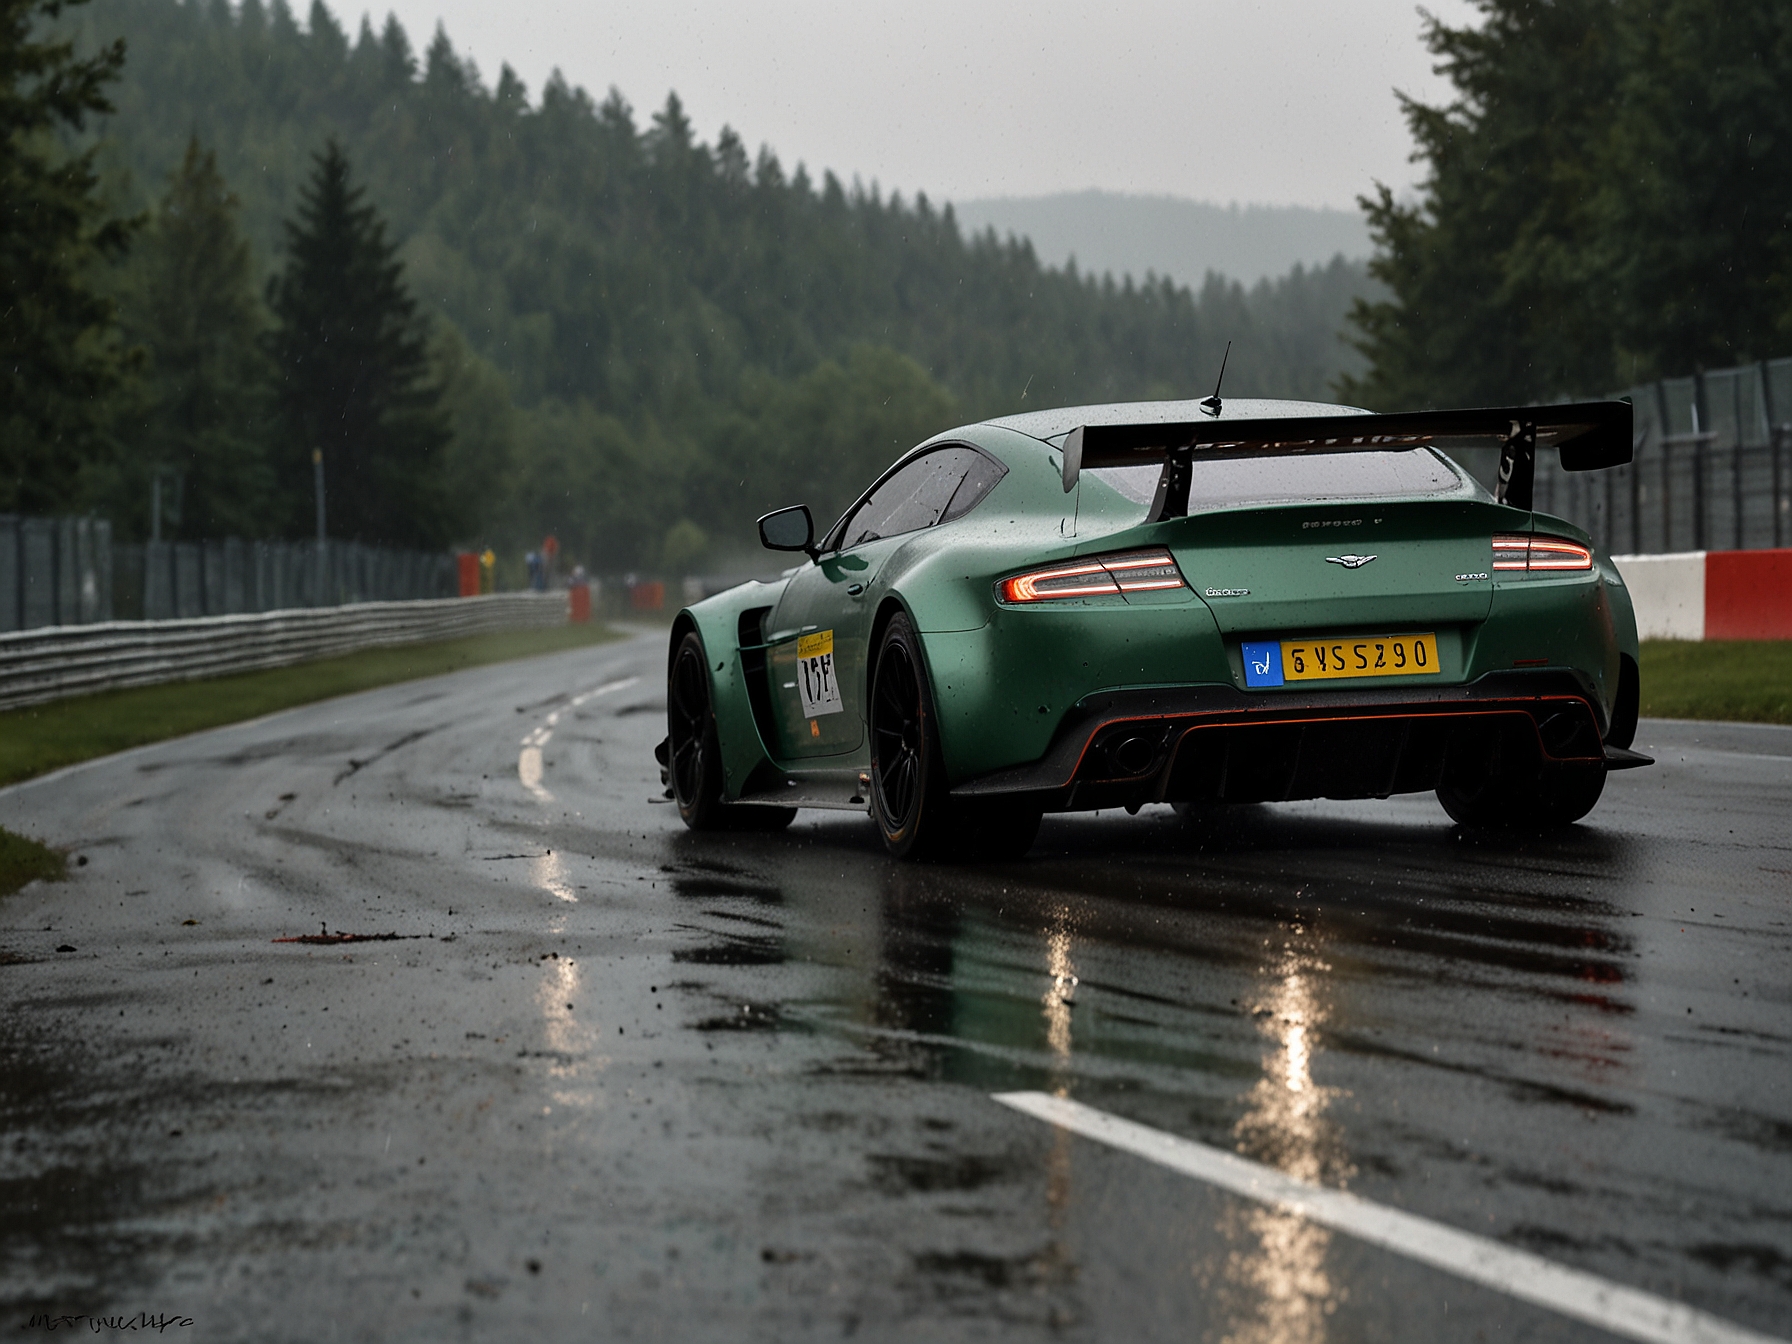 An Aston Martin Vantage GT3 slices through the rain-soaked Circuit de Spa-Francorchamps, showcasing its robust performance and aerodynamic design in a tense and unpredictable endurance race.